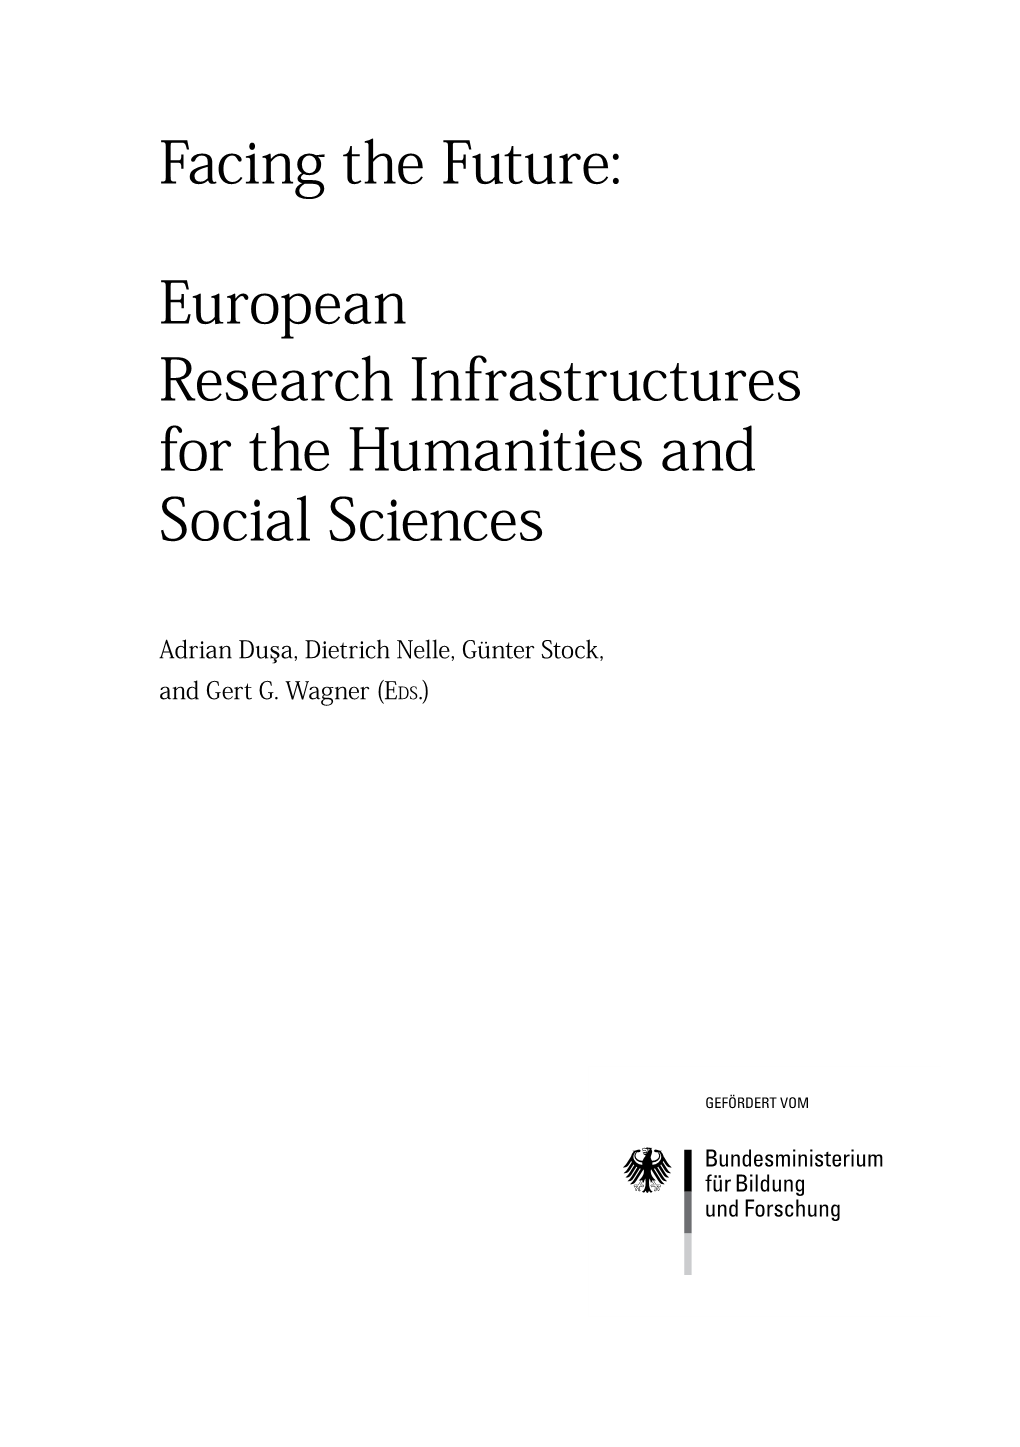 Facing the Future: European Research Infrastructures for the Humanities and Social Sciences